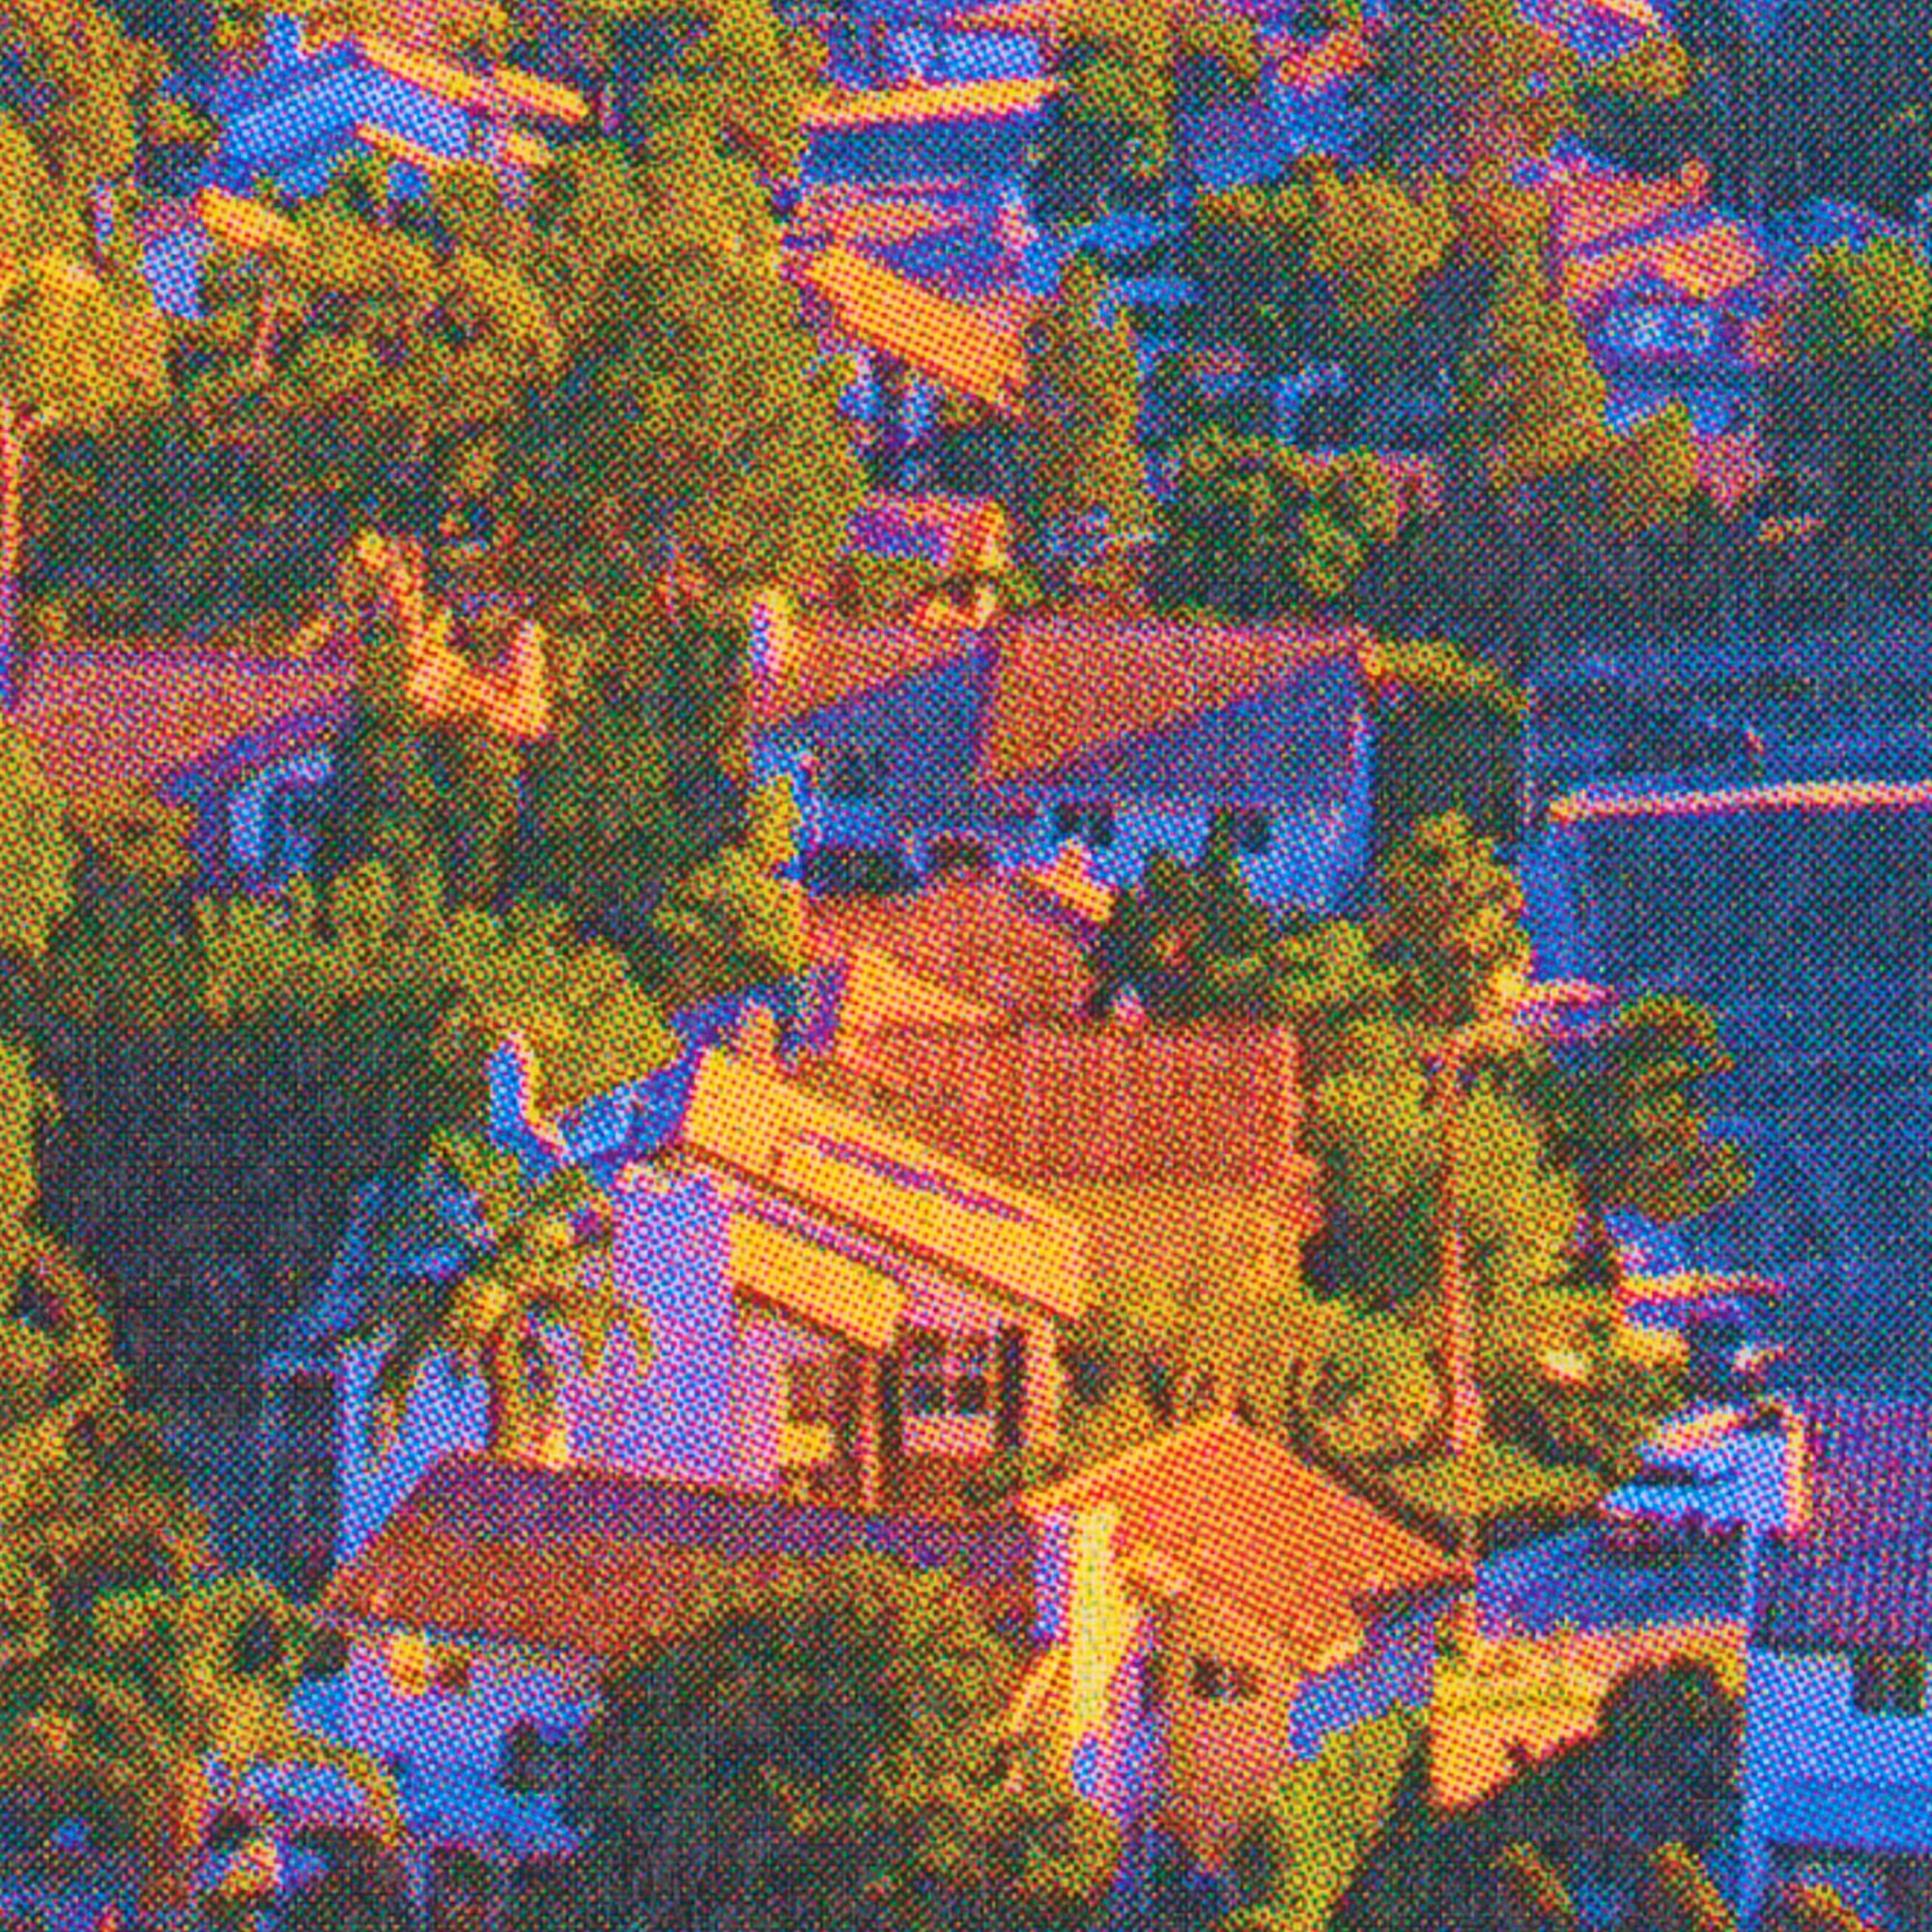 A pixelated view of suburban homes nestled within trees.